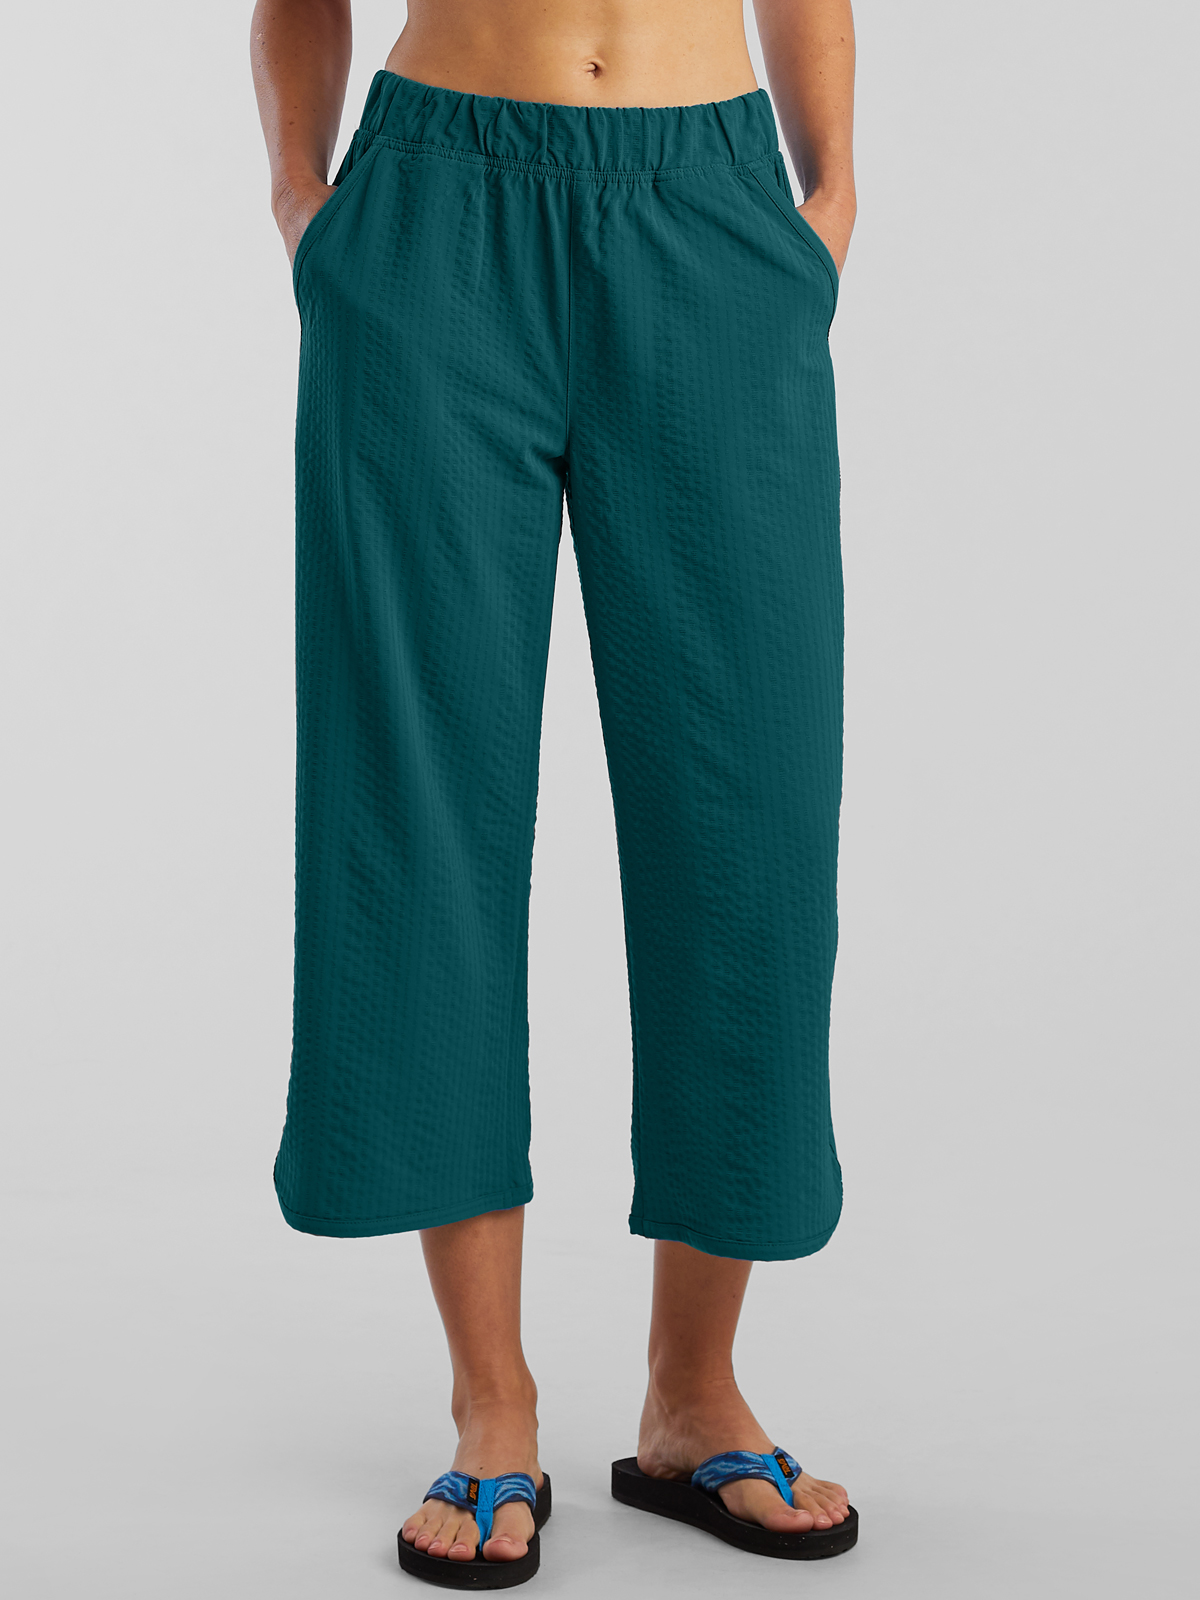 Wide Leg Cropped Pants: Slaycation Textured | Title Nine